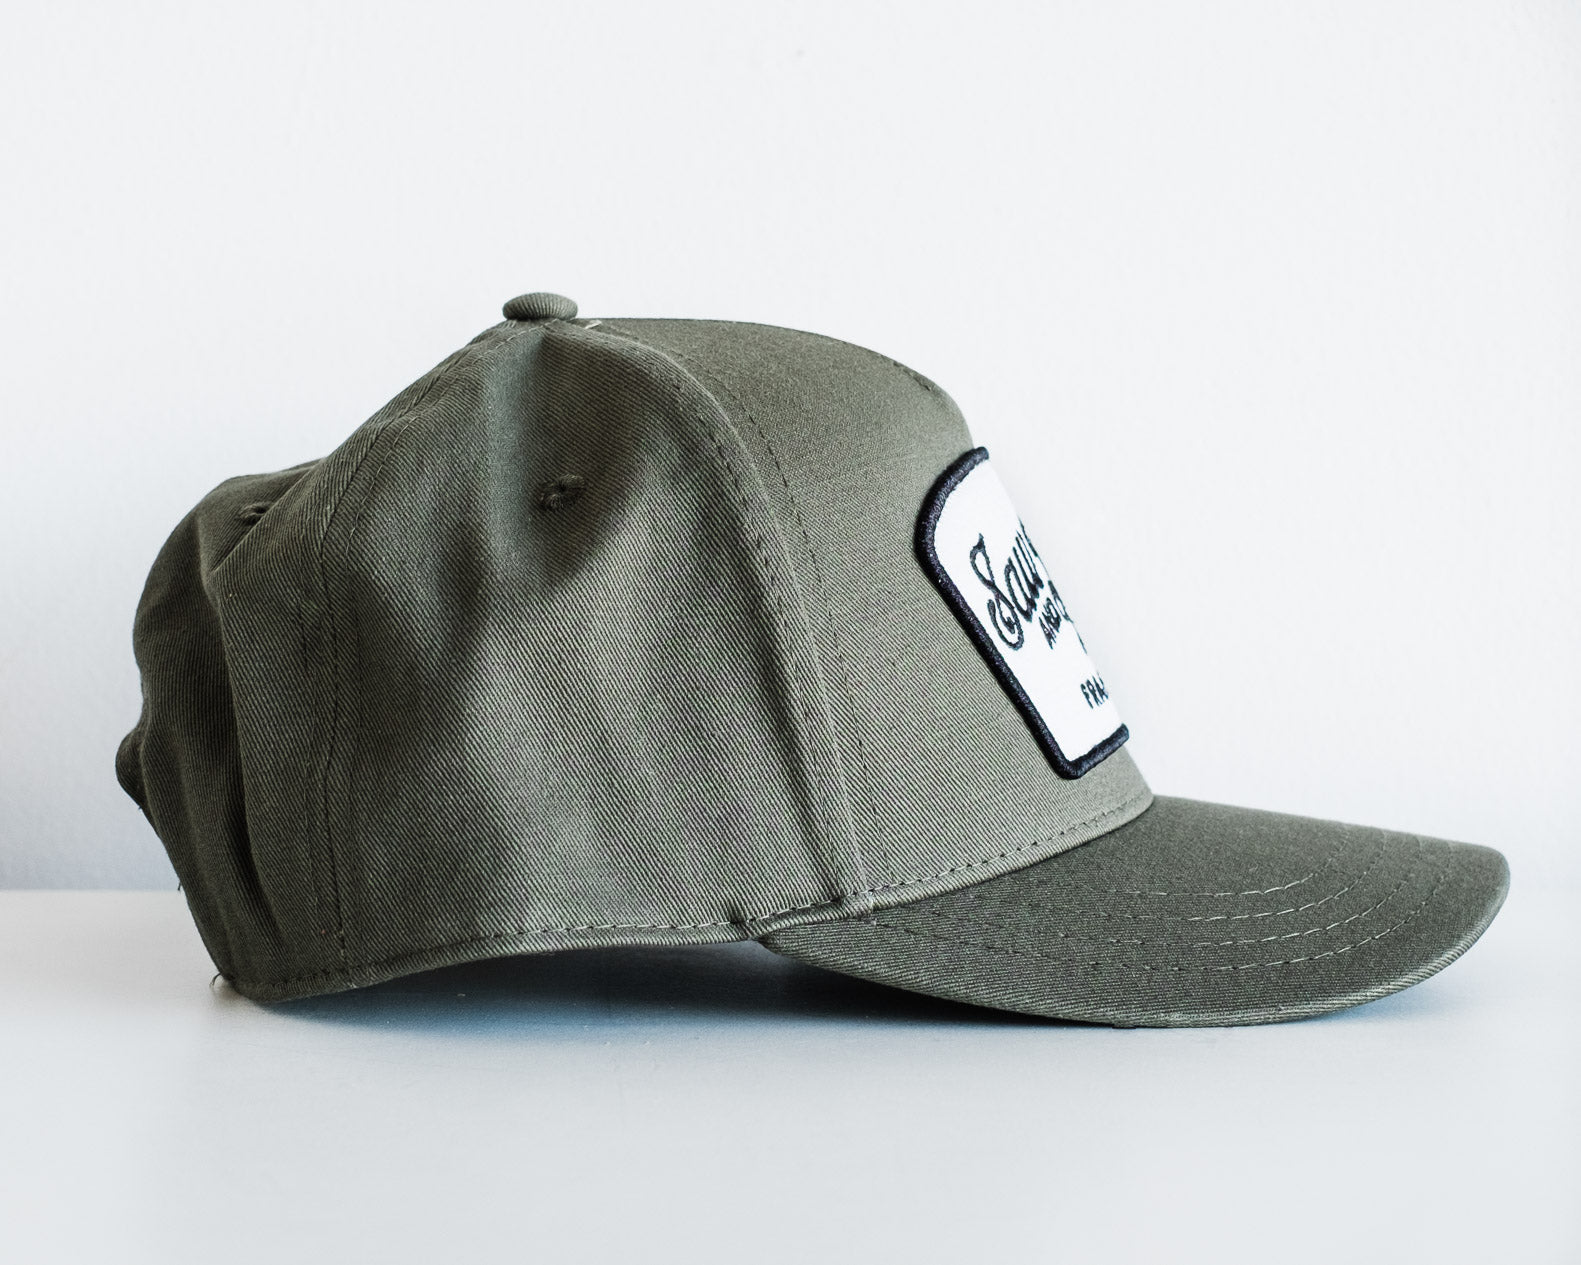 The Cotton Twill Workshop Hat in Olive Green